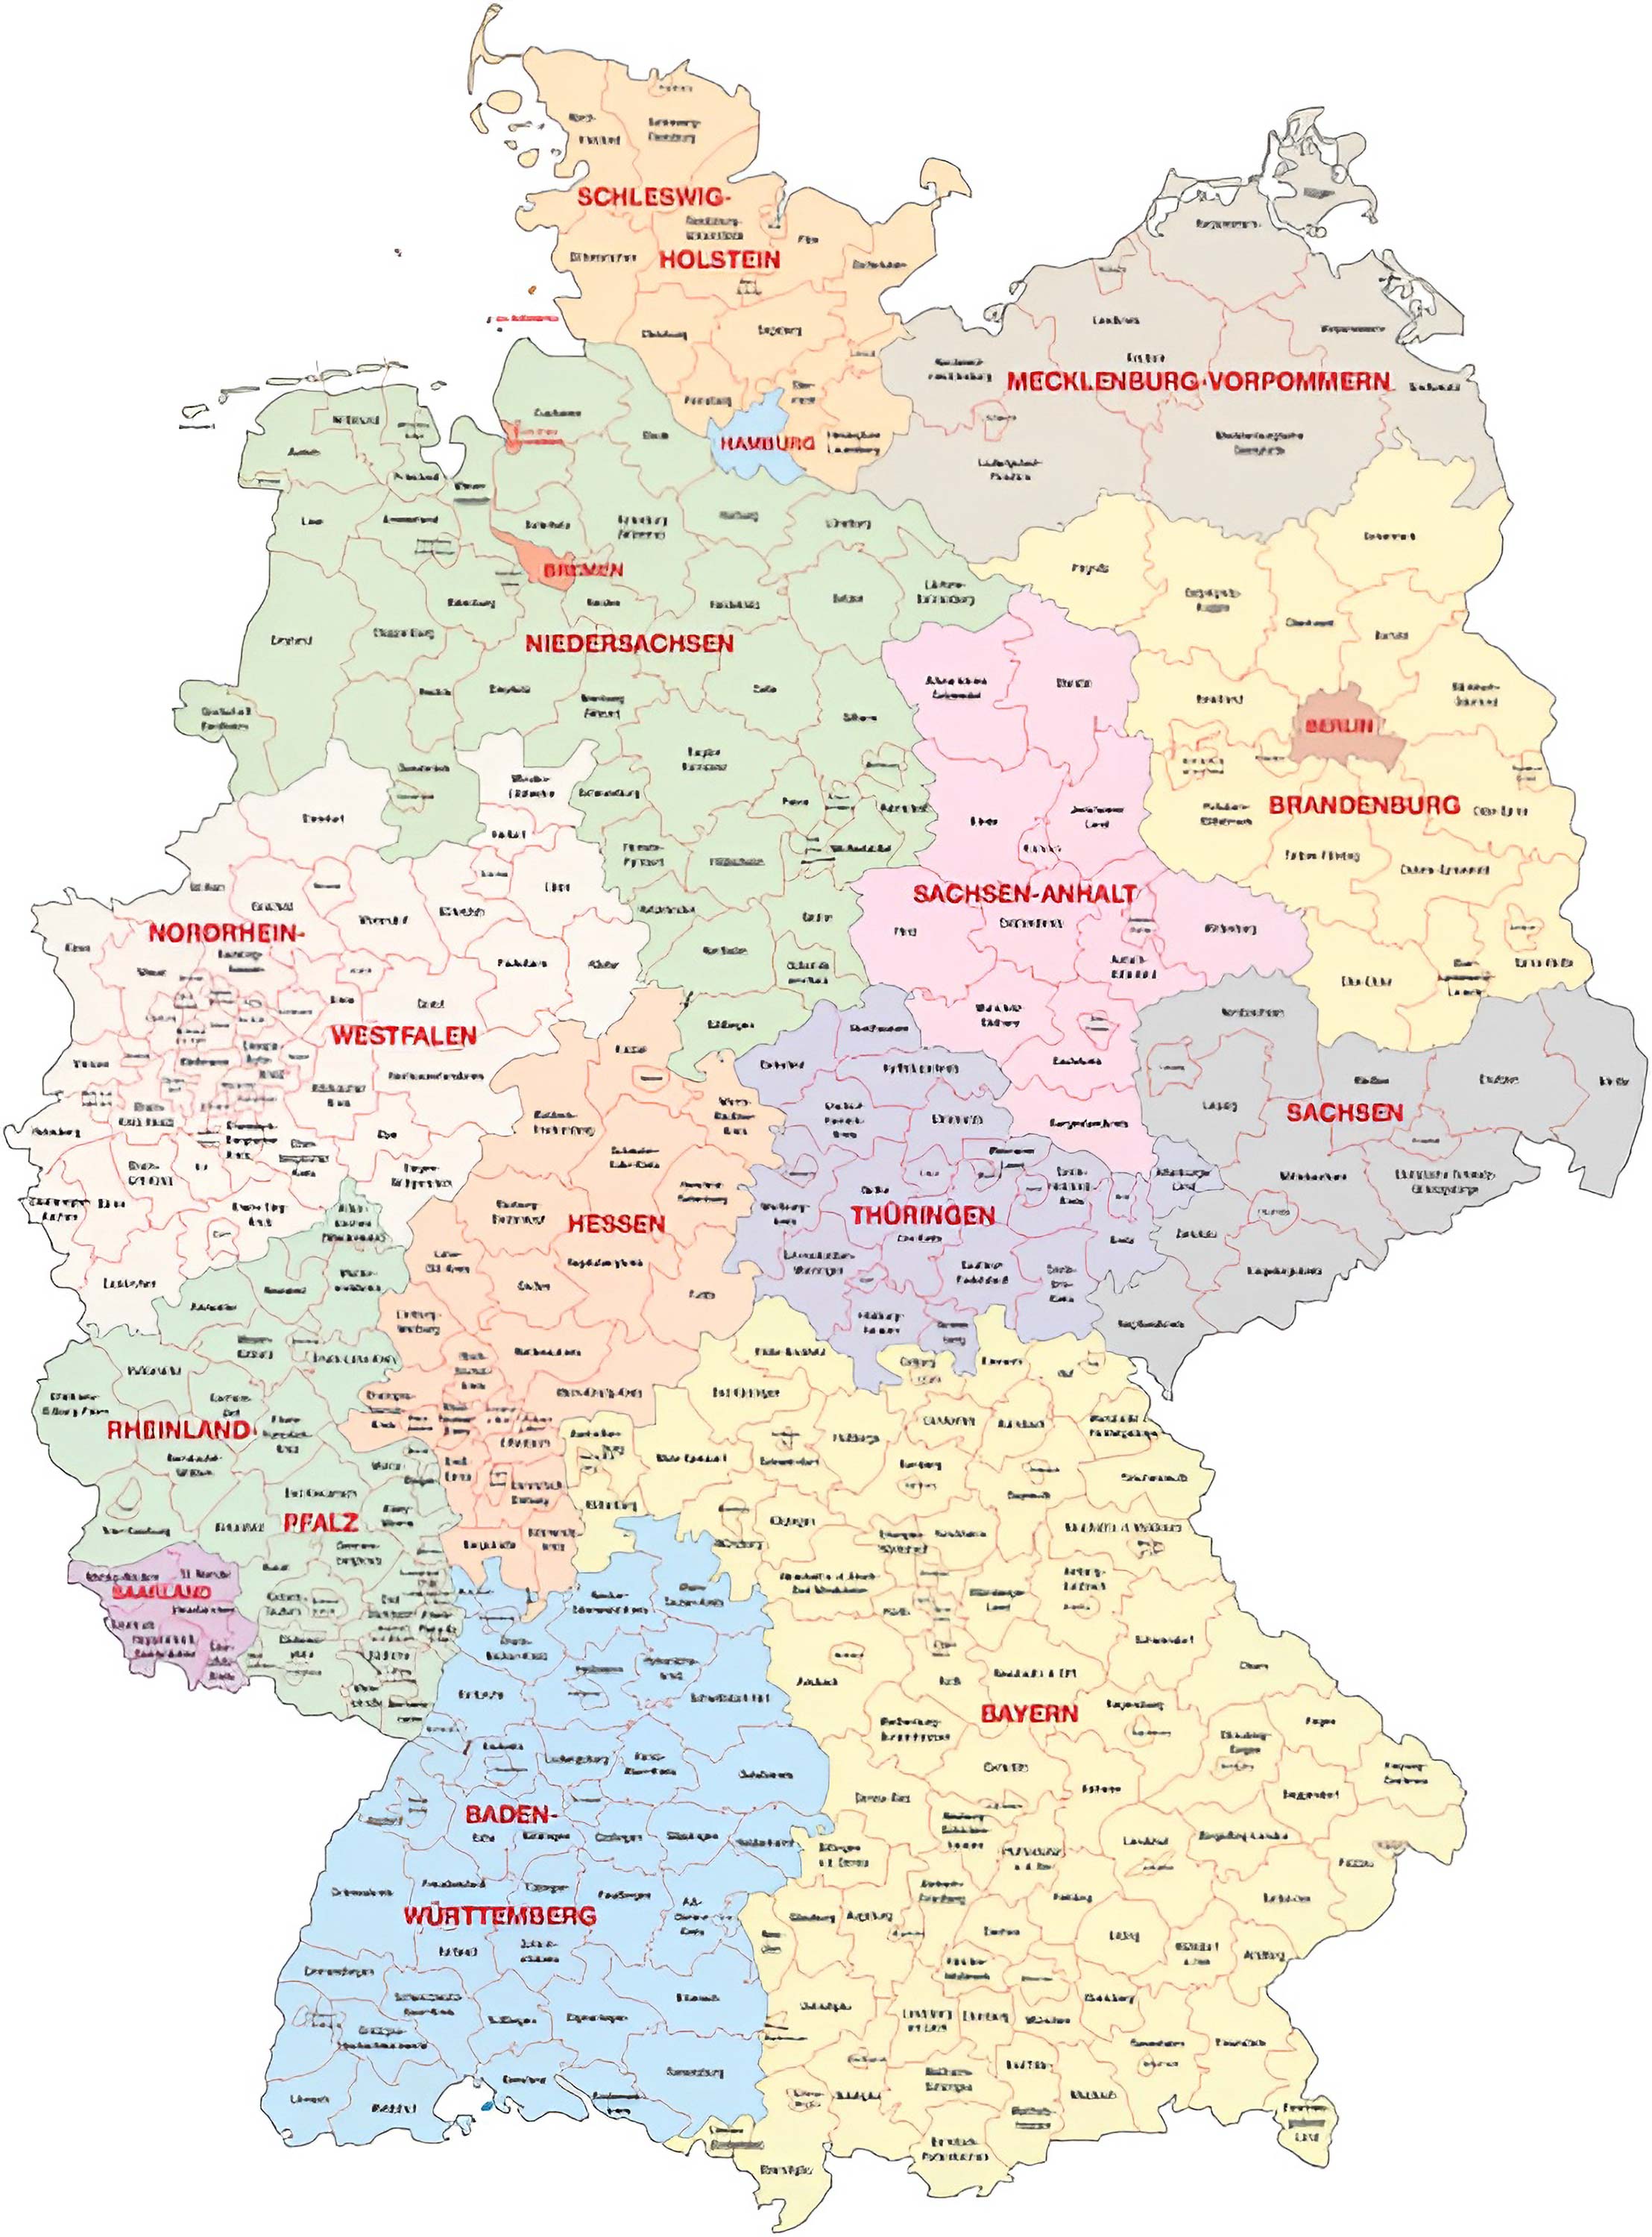 Germany Political Map